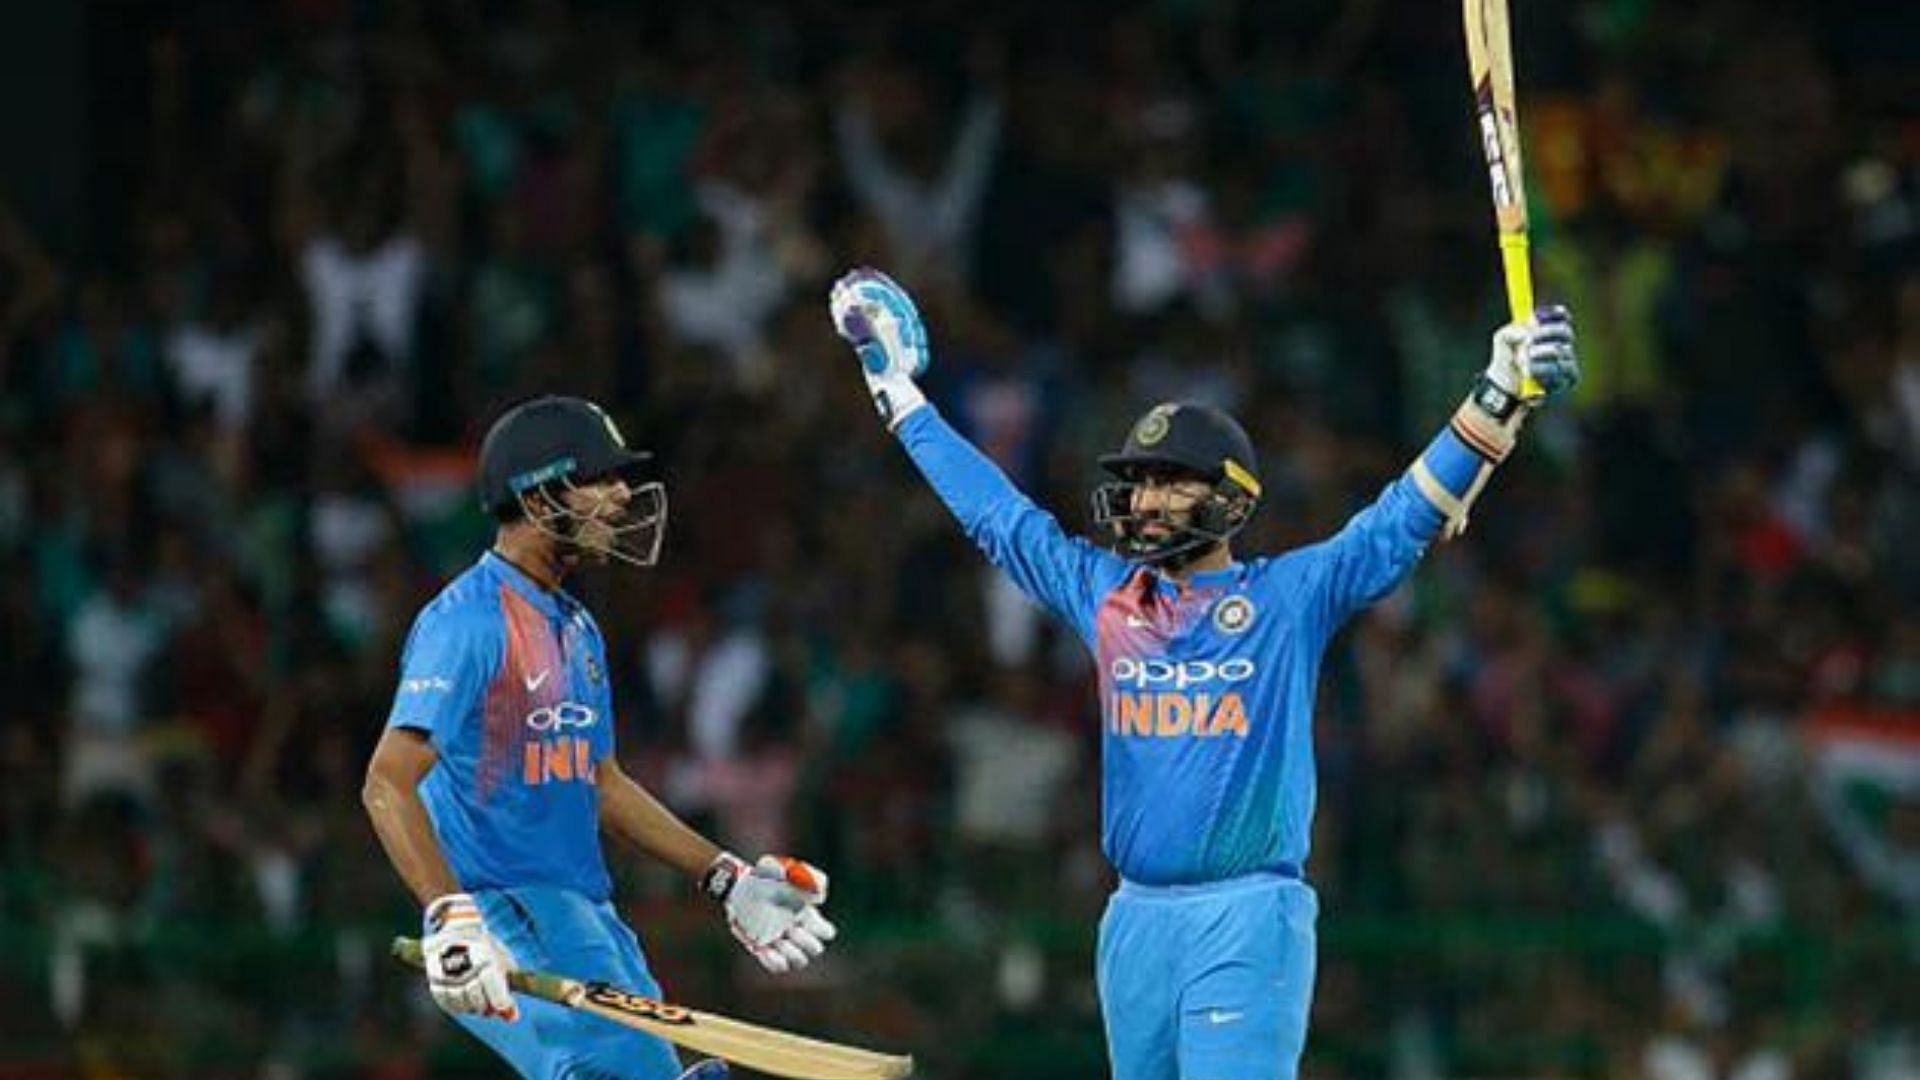 Dinesh Karthik celebrates after taking India to a miraculous last-gasp win over Bangladesh